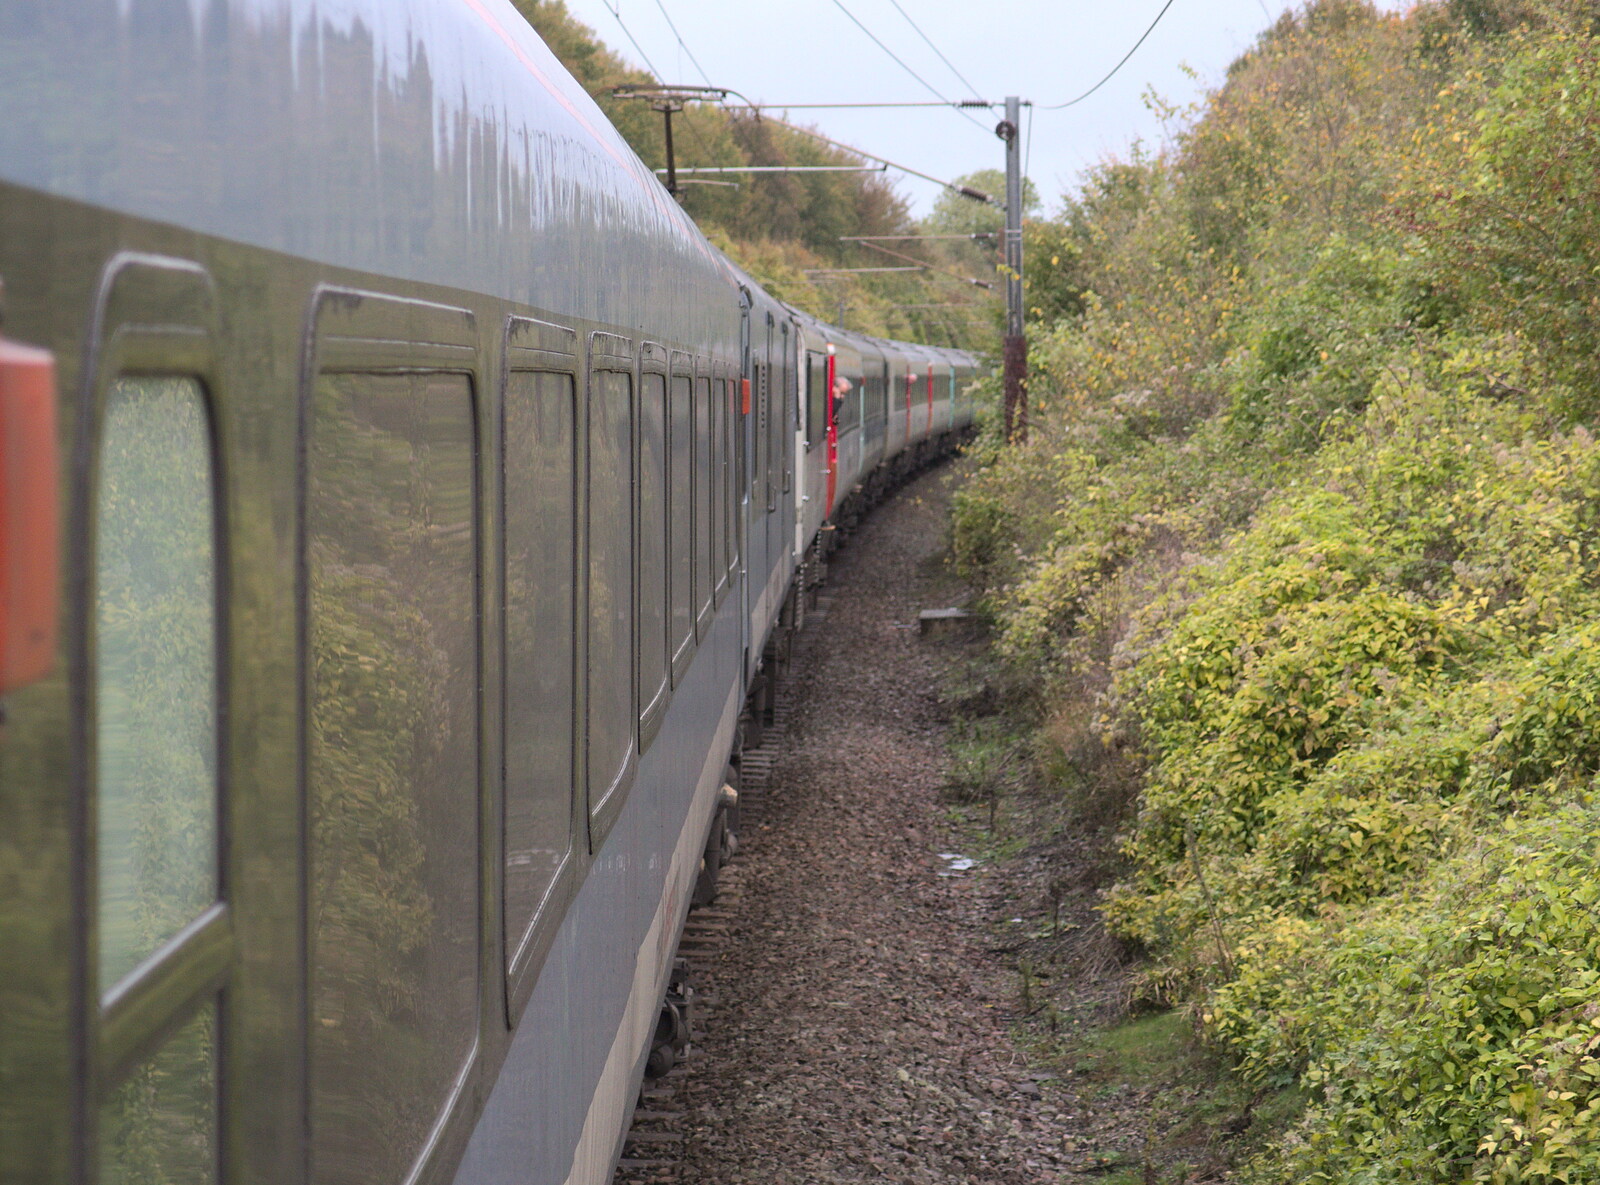 The two trains are joined up from (Very) Long Train (Not) Running, Stowmarket, Suffolk - 21st October 2014